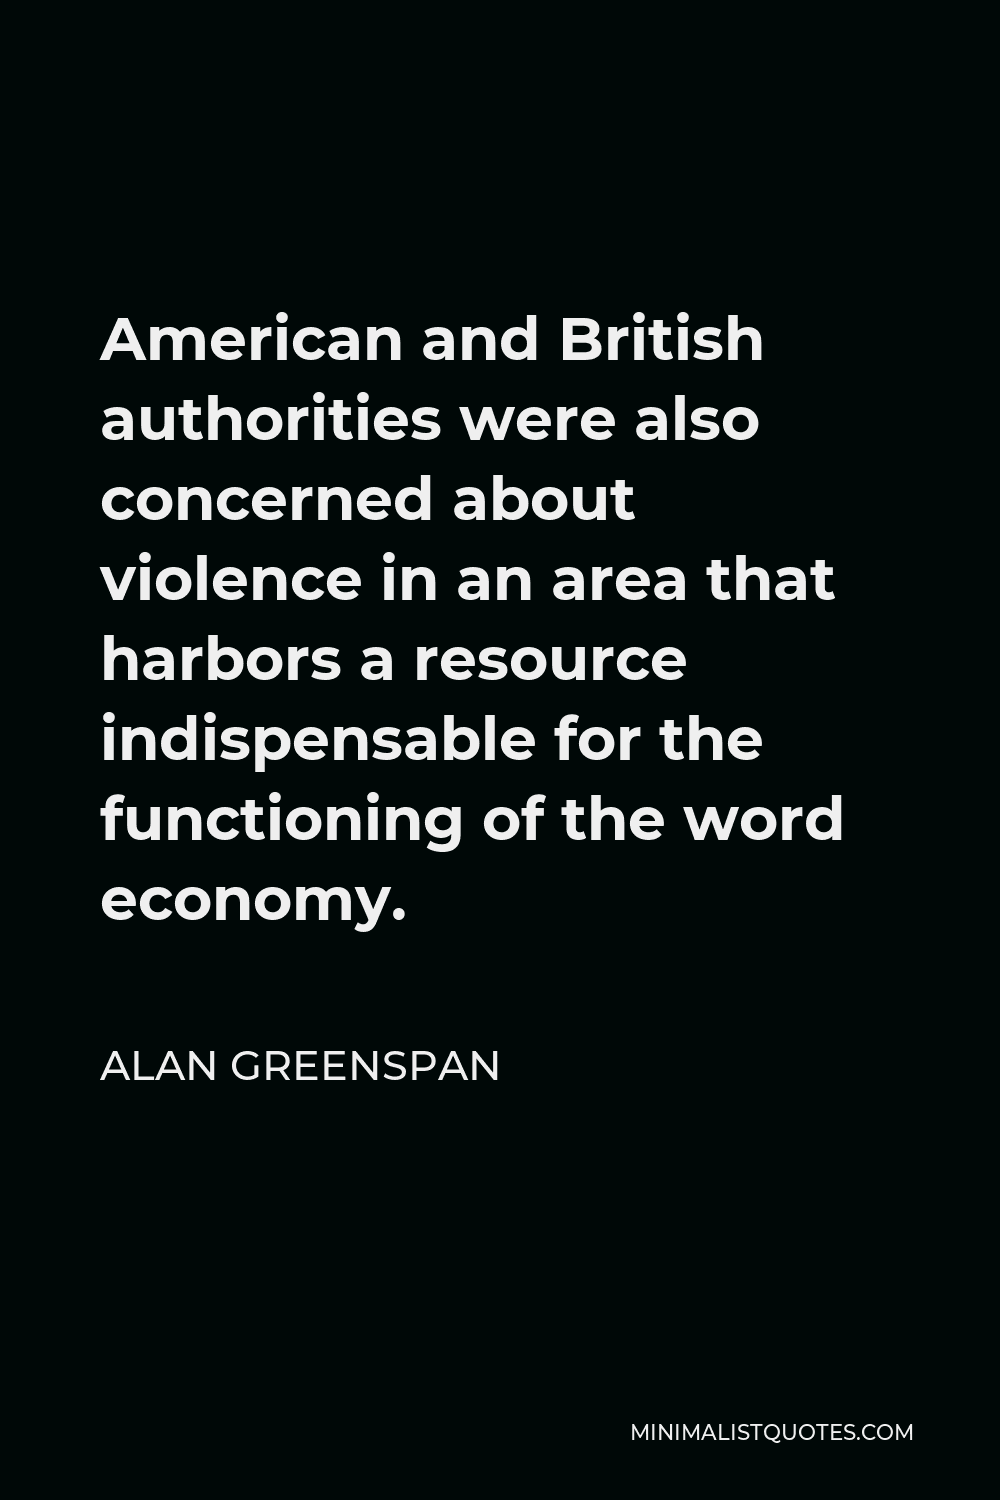 Alan Greenspan Quote - American and British authorities were also concerned about violence in an area that harbors a resource indispensable for the functioning of the word economy.